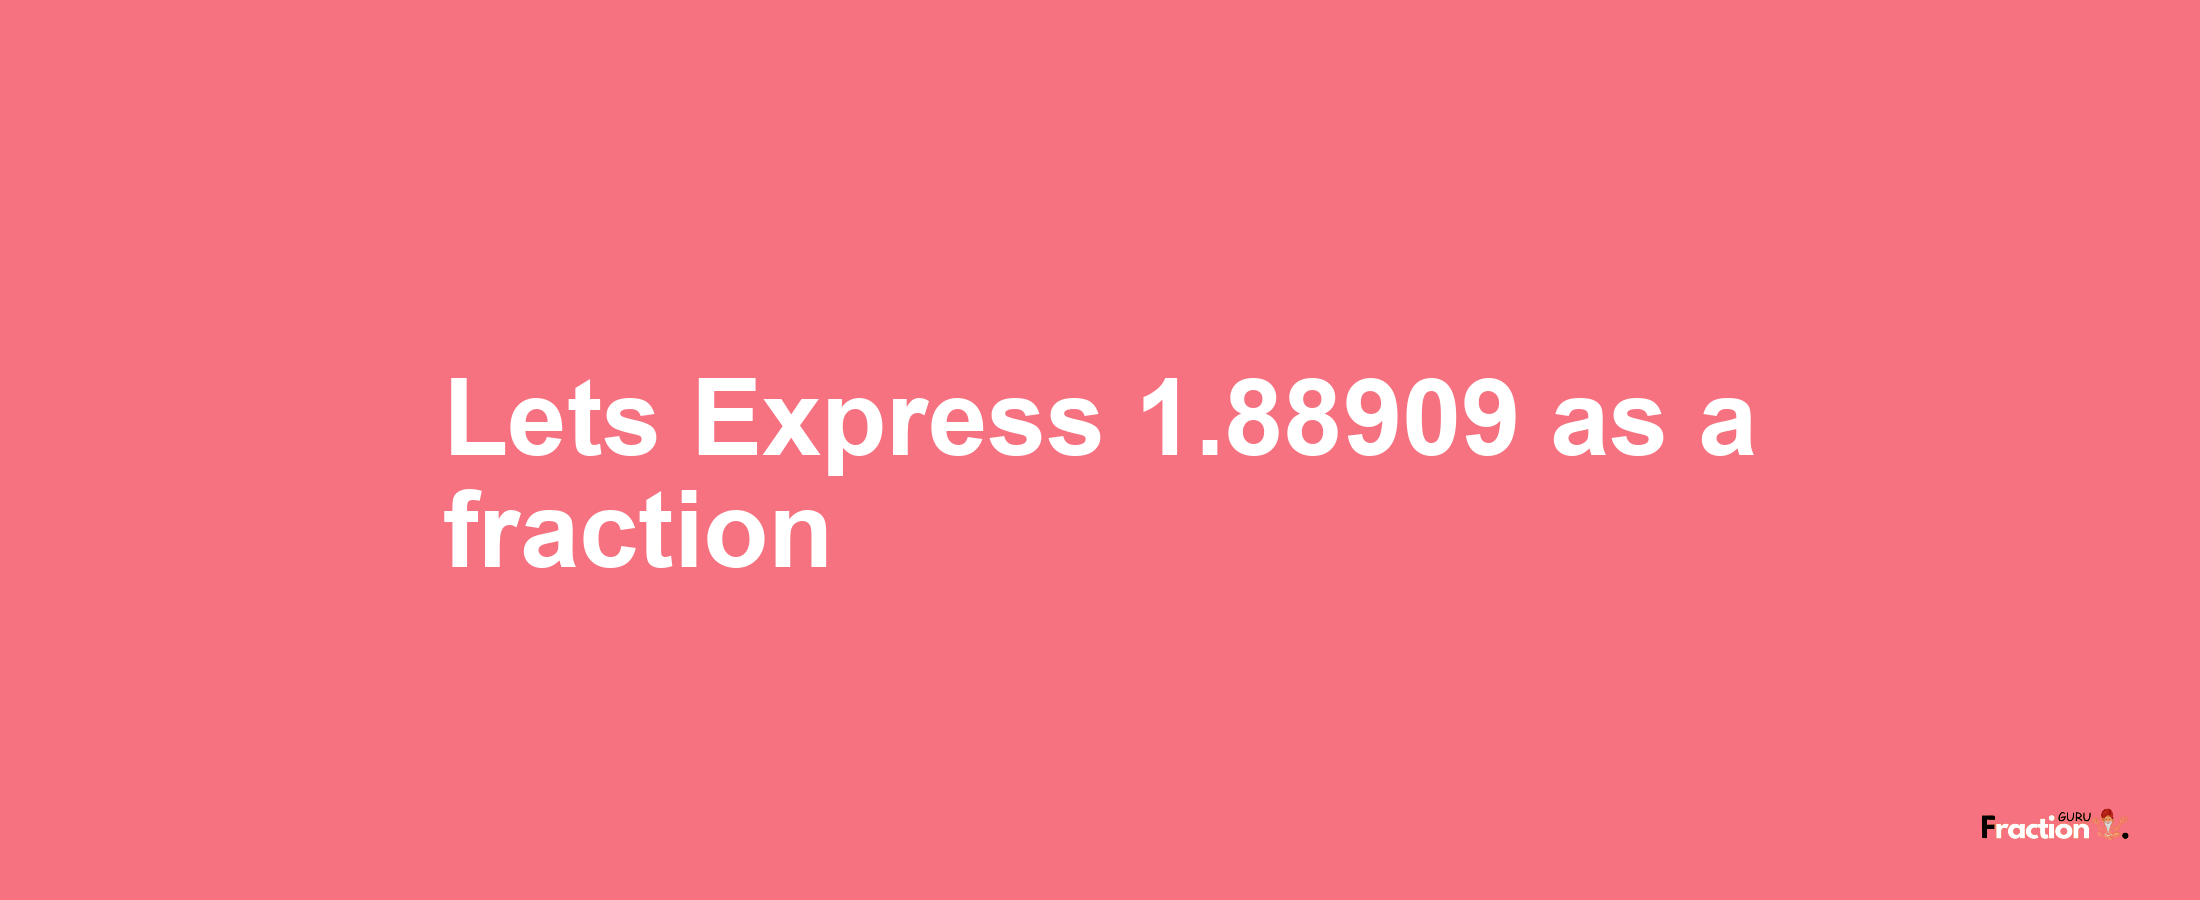 Lets Express 1.88909 as afraction